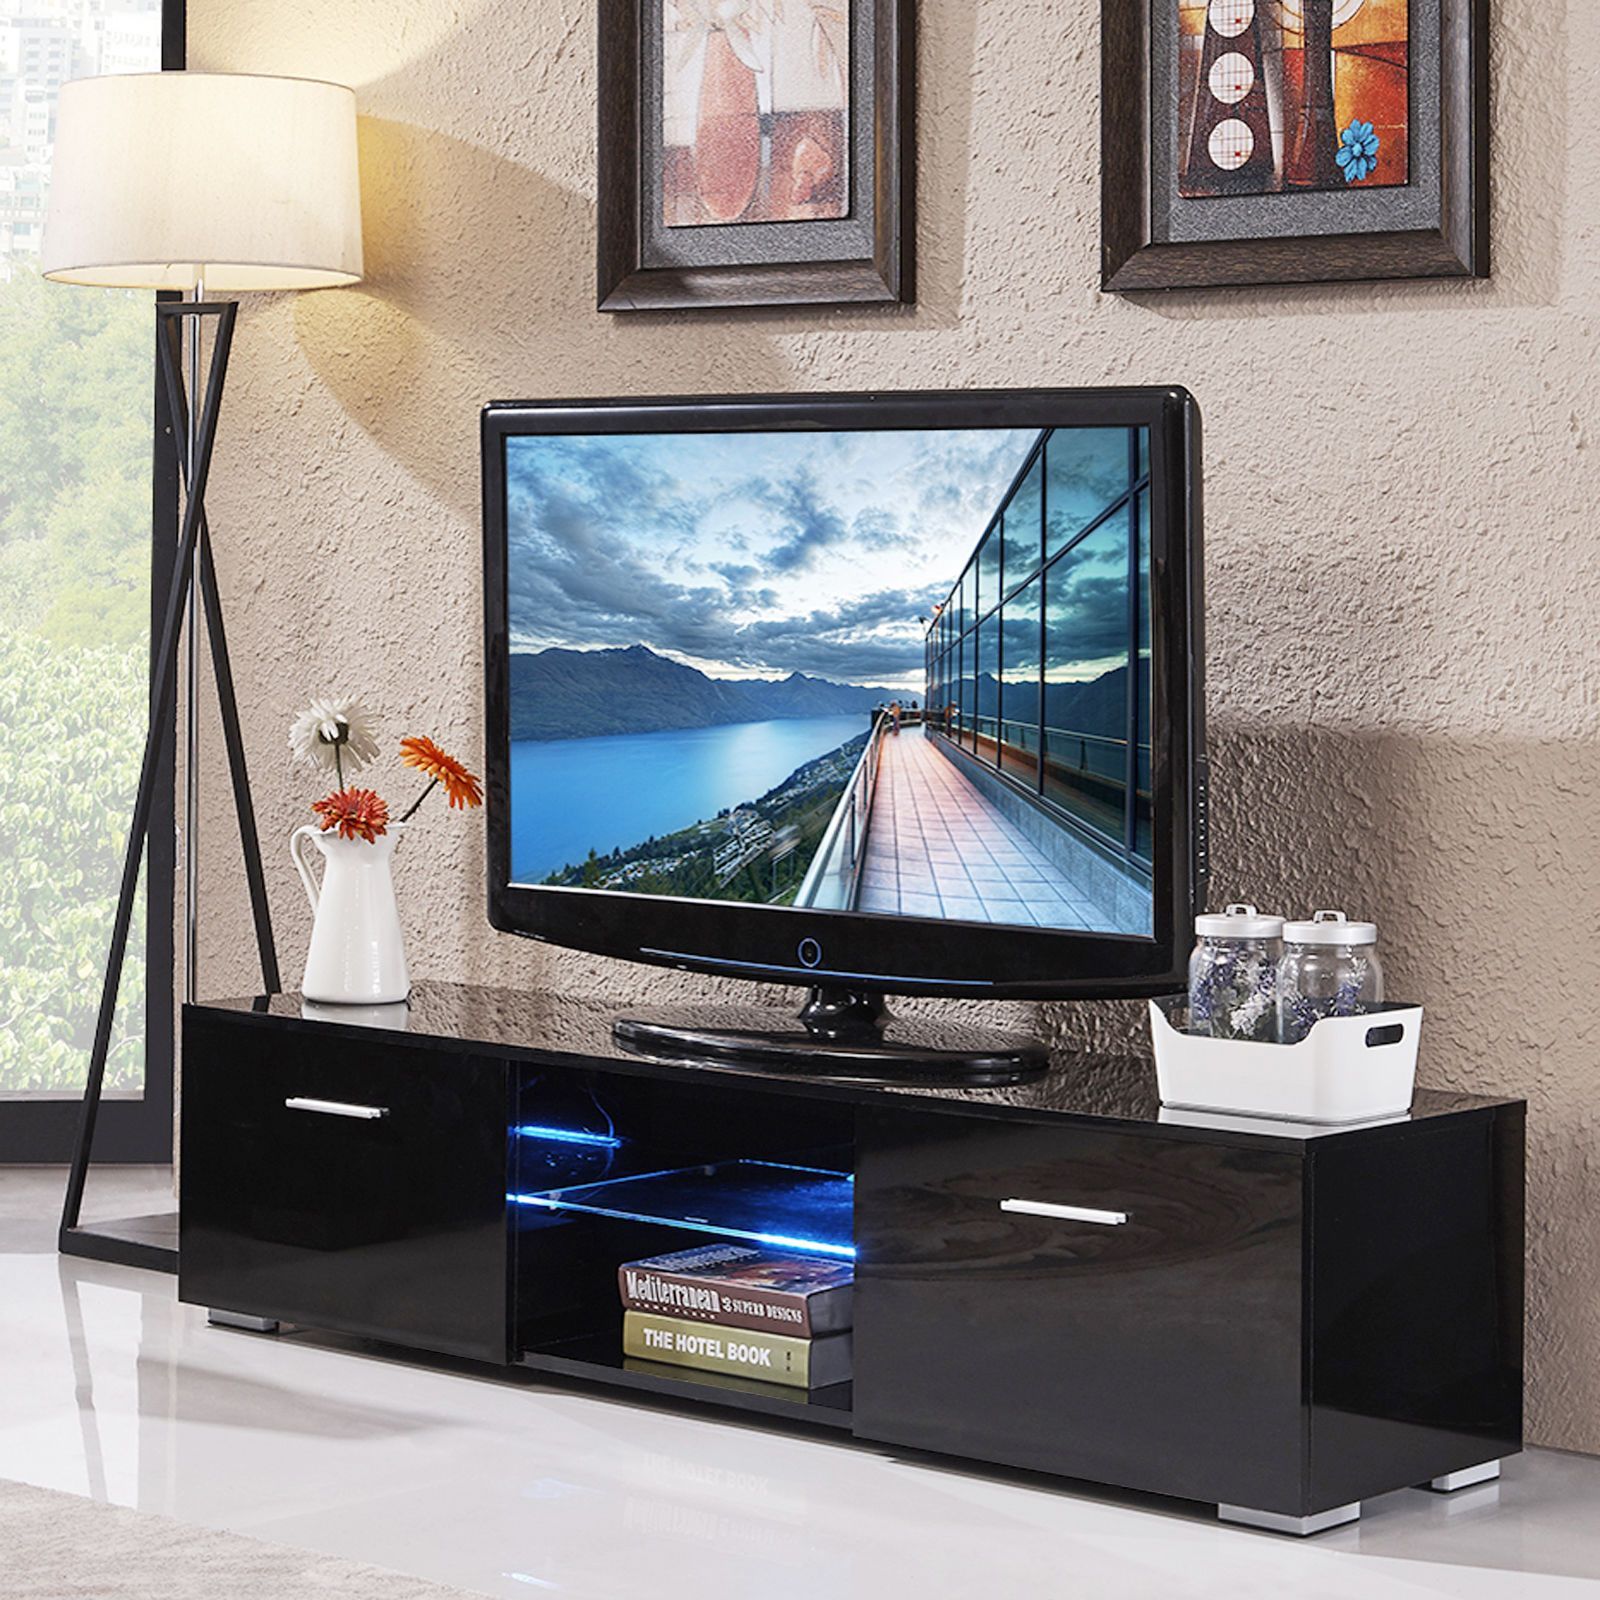 High Gloss Tv Stand Unit Cabinet Console Furniture W/led Inside Black Tv Cabinets With Drawers (View 5 of 15)